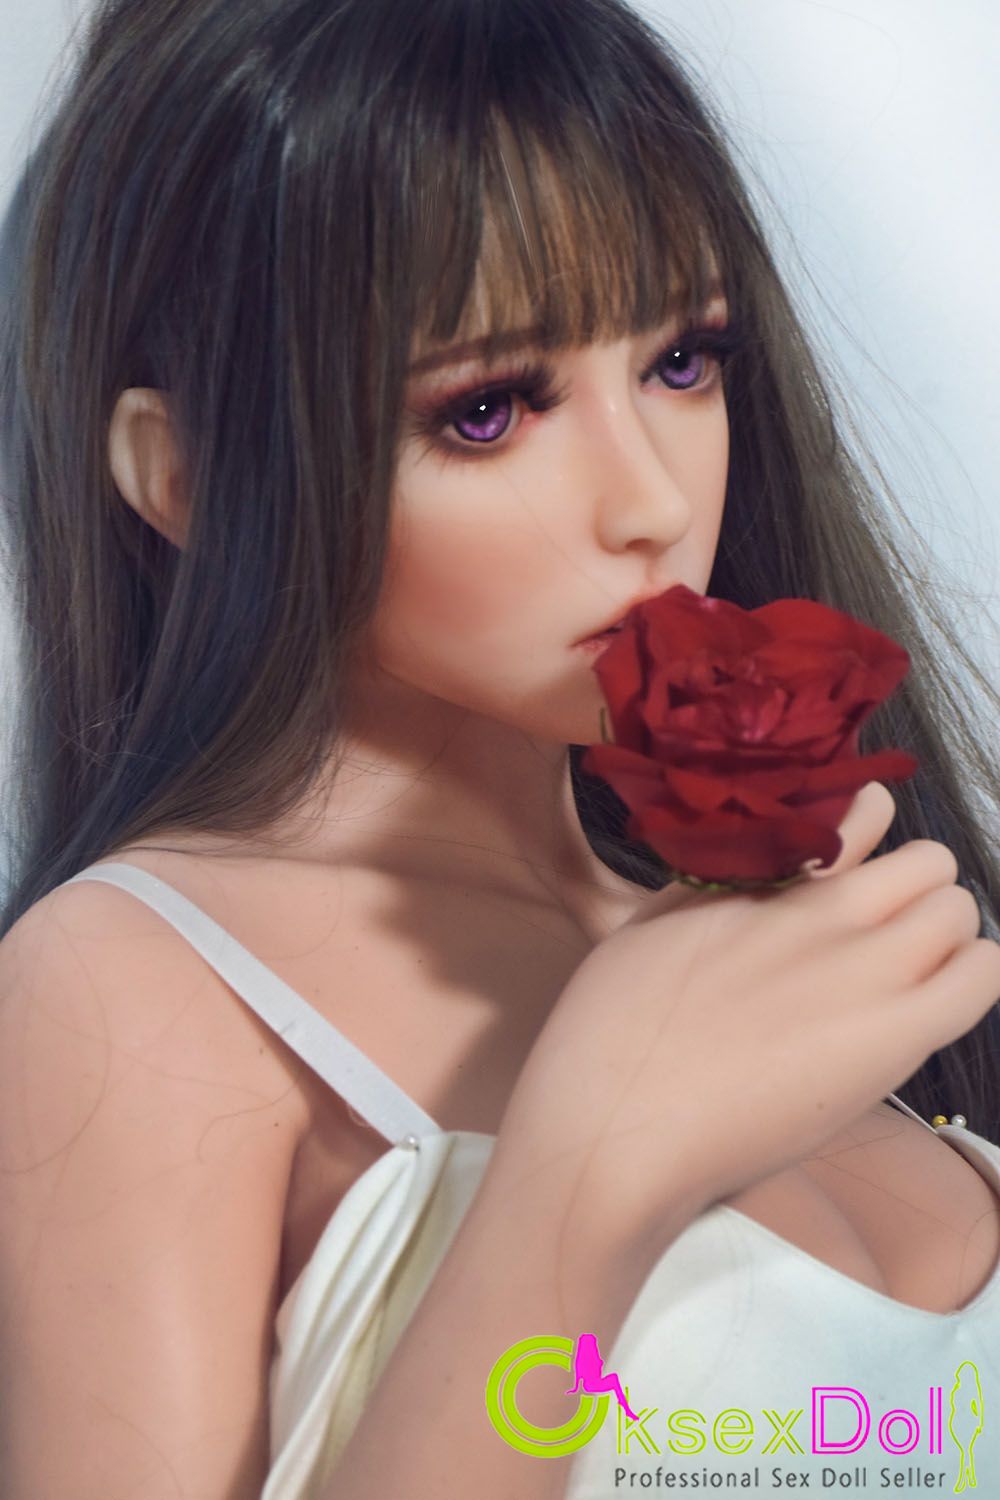 elsababe-doll.html B-cup Real Love Doll Pictures